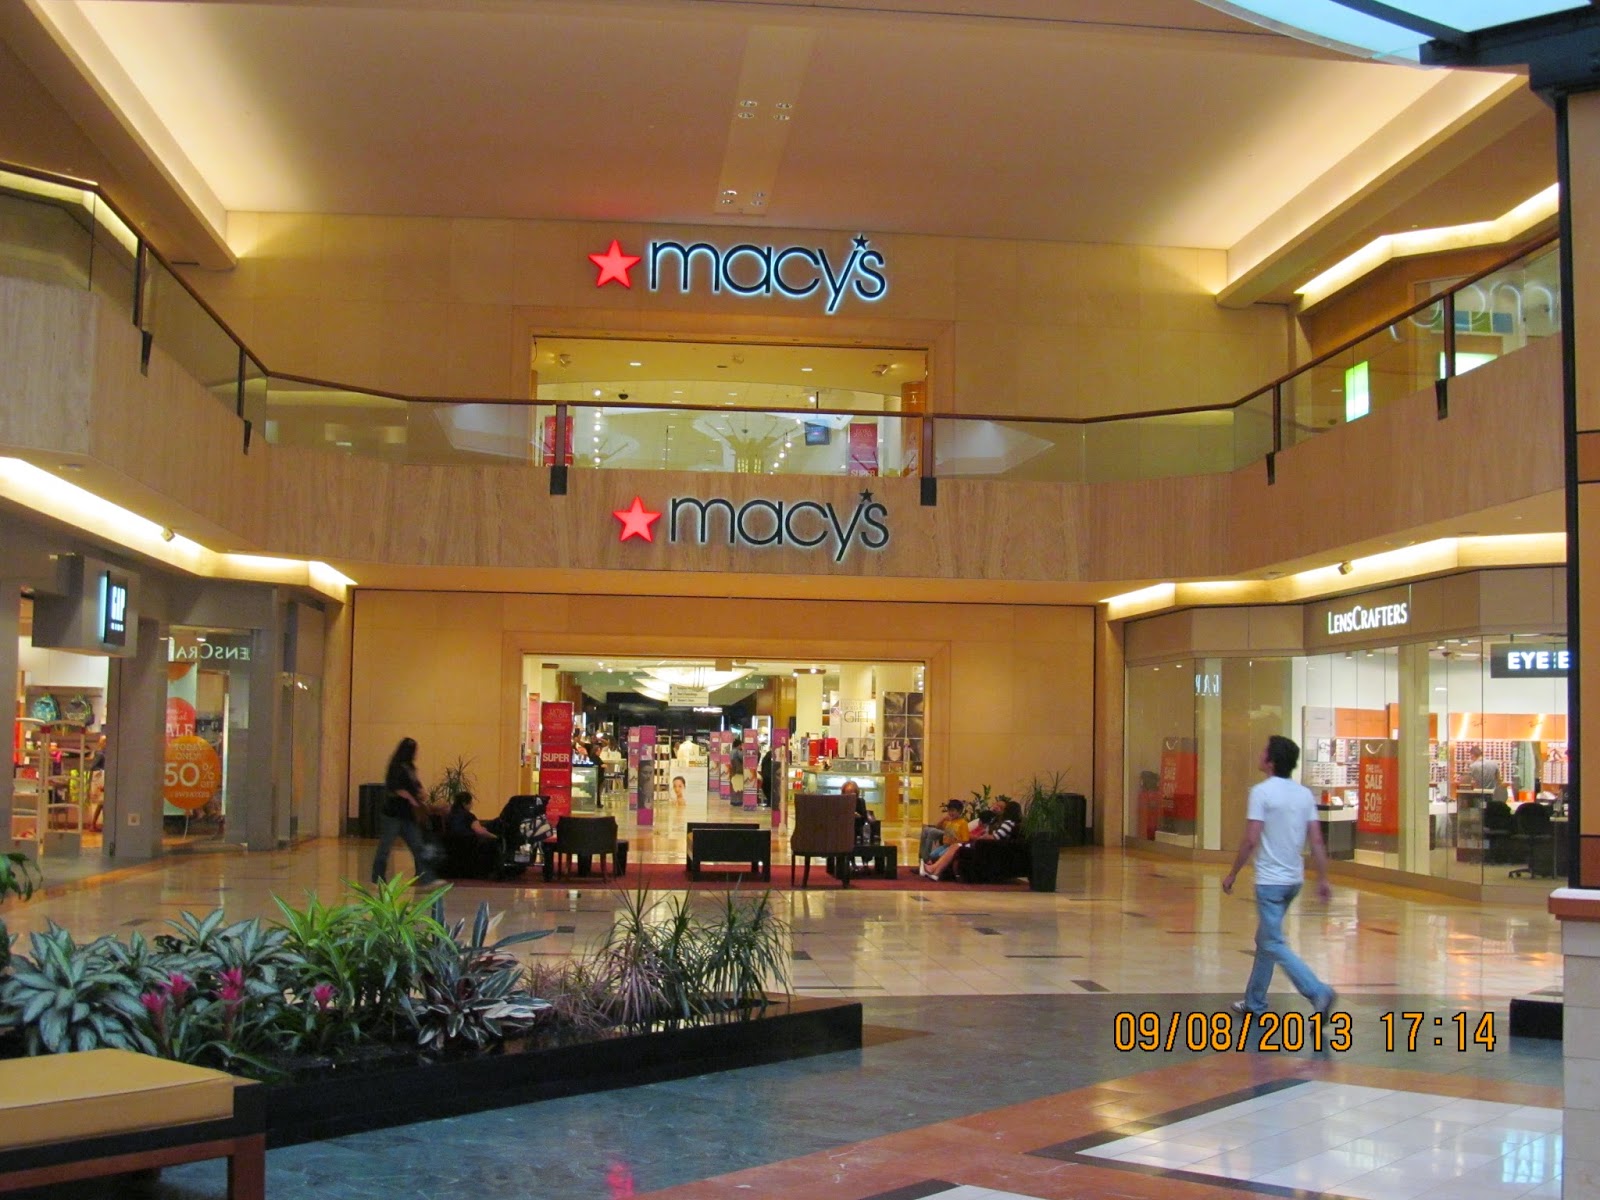 Trip to the Mall: Northbrook Court-(Northbrook, IL).